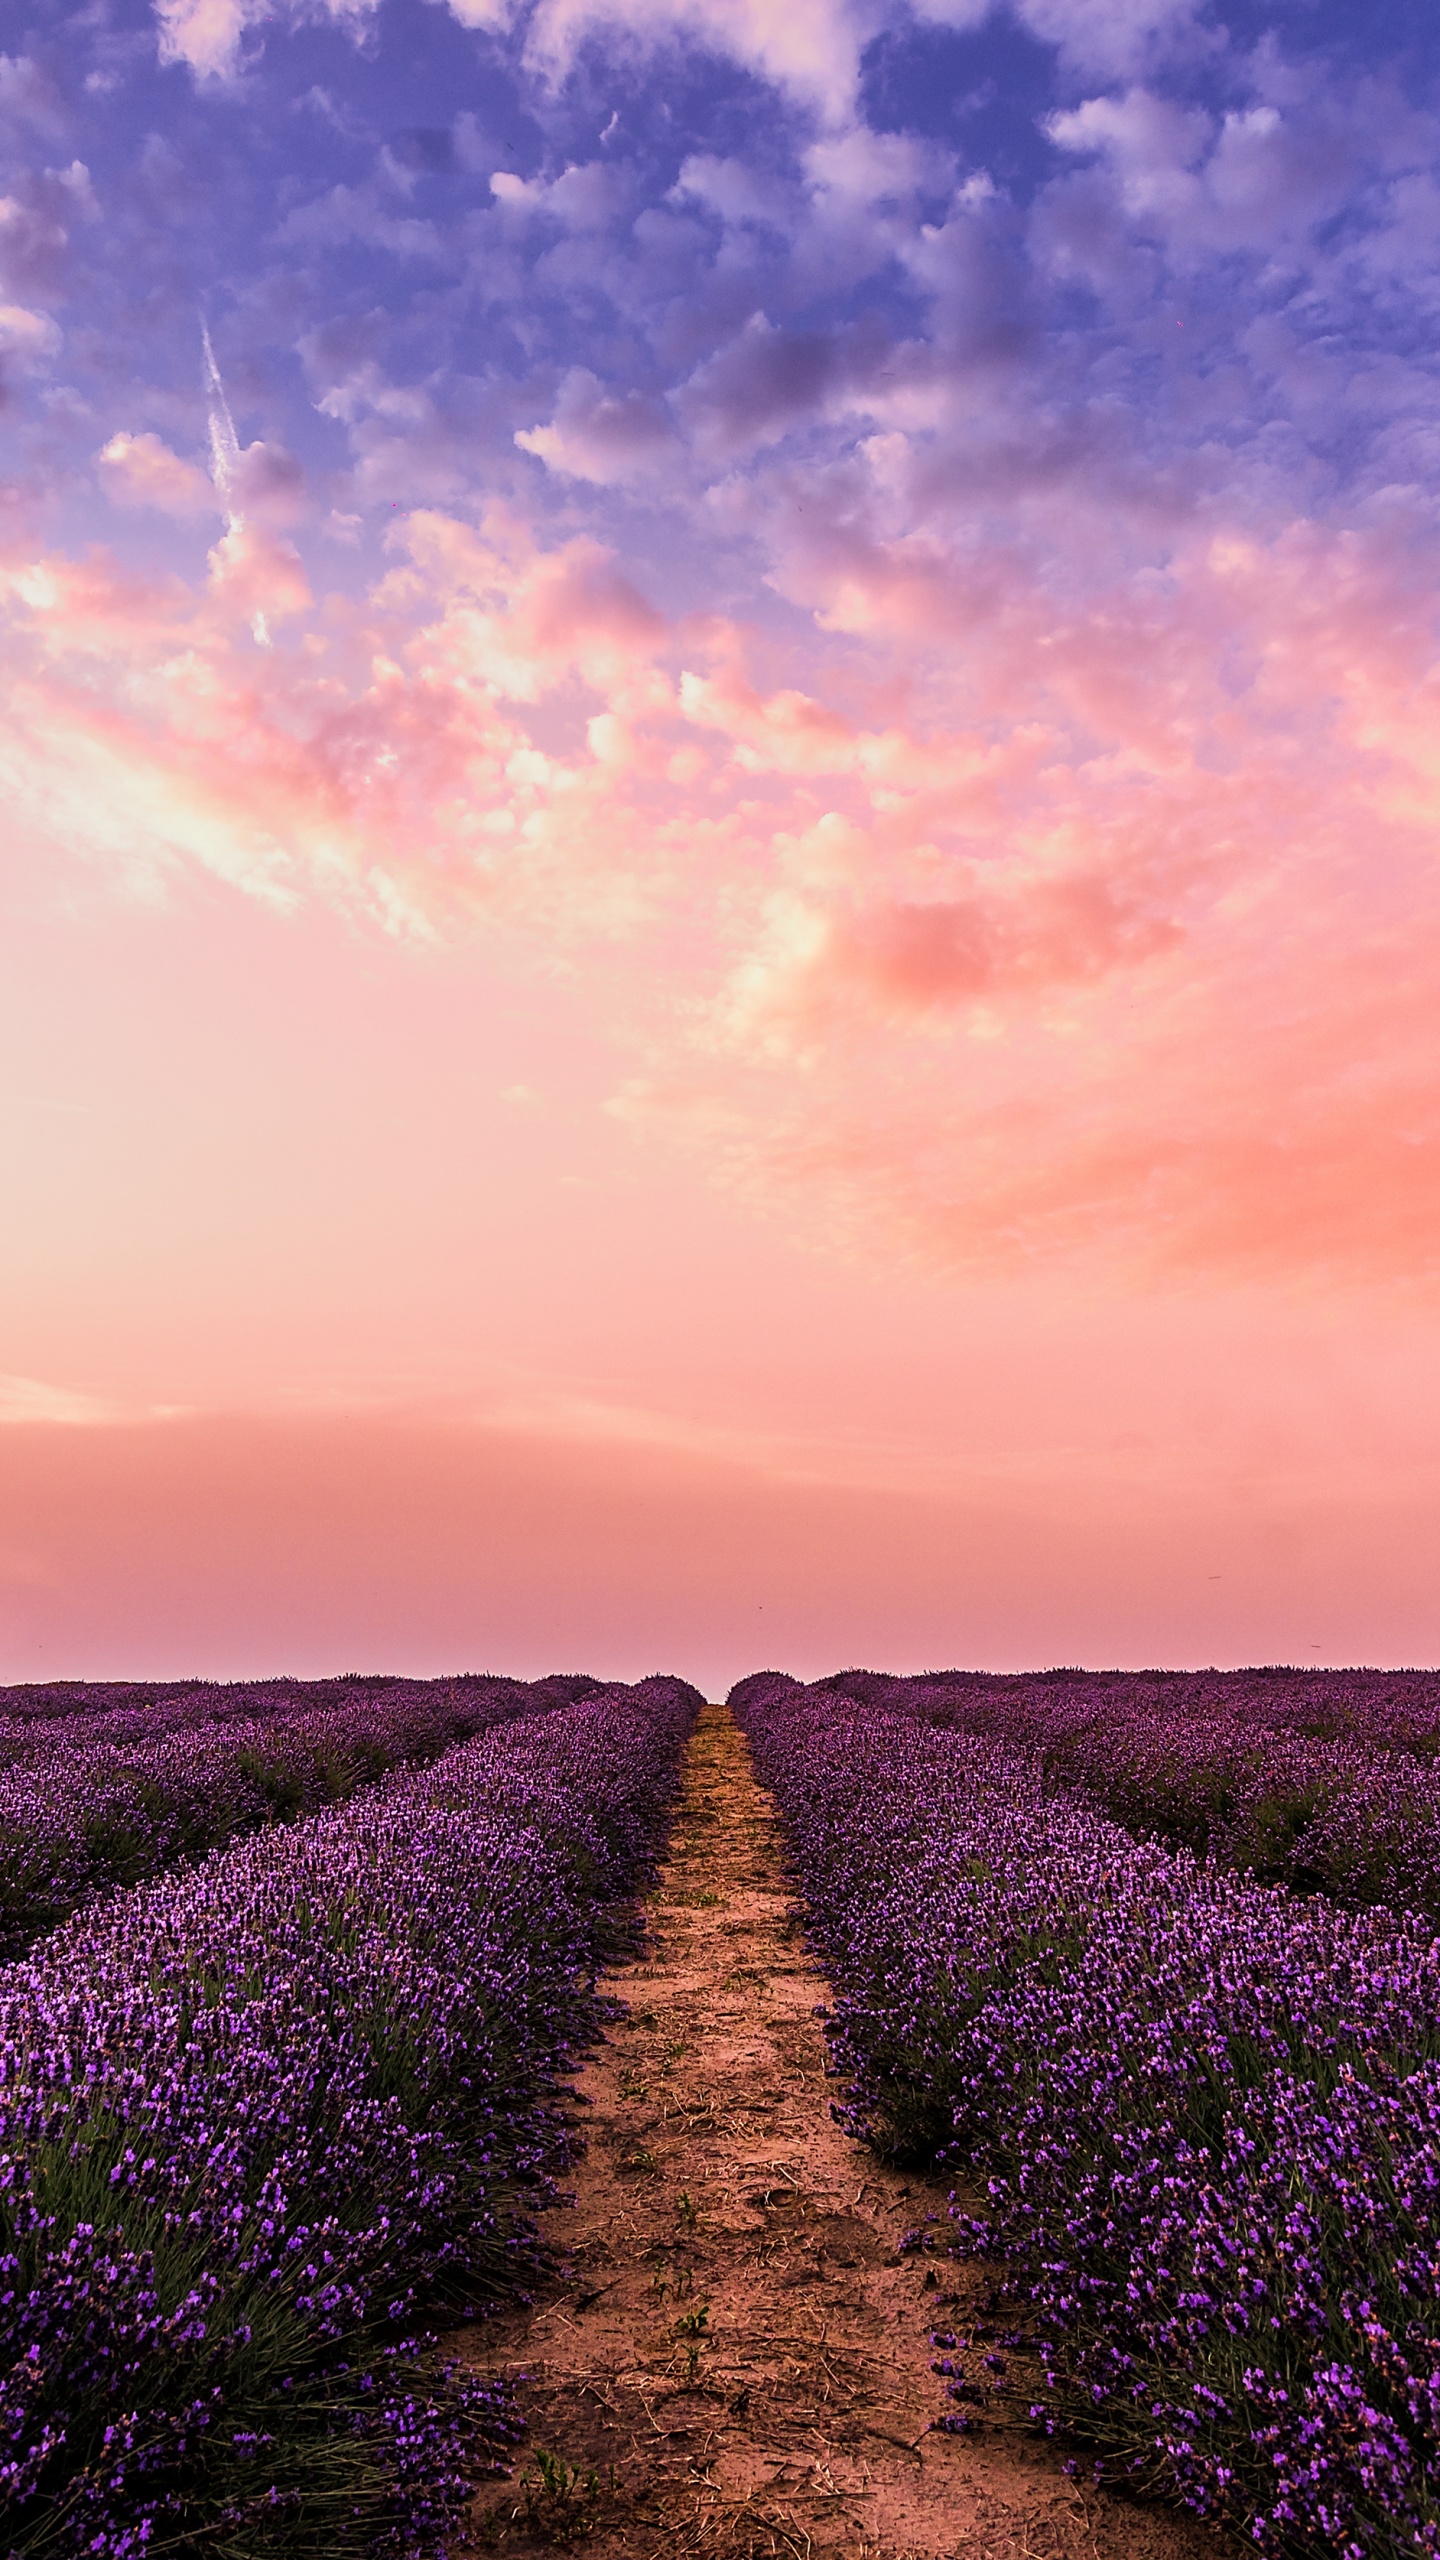 Lavender in The Magnificent Sky HD wallpaper download